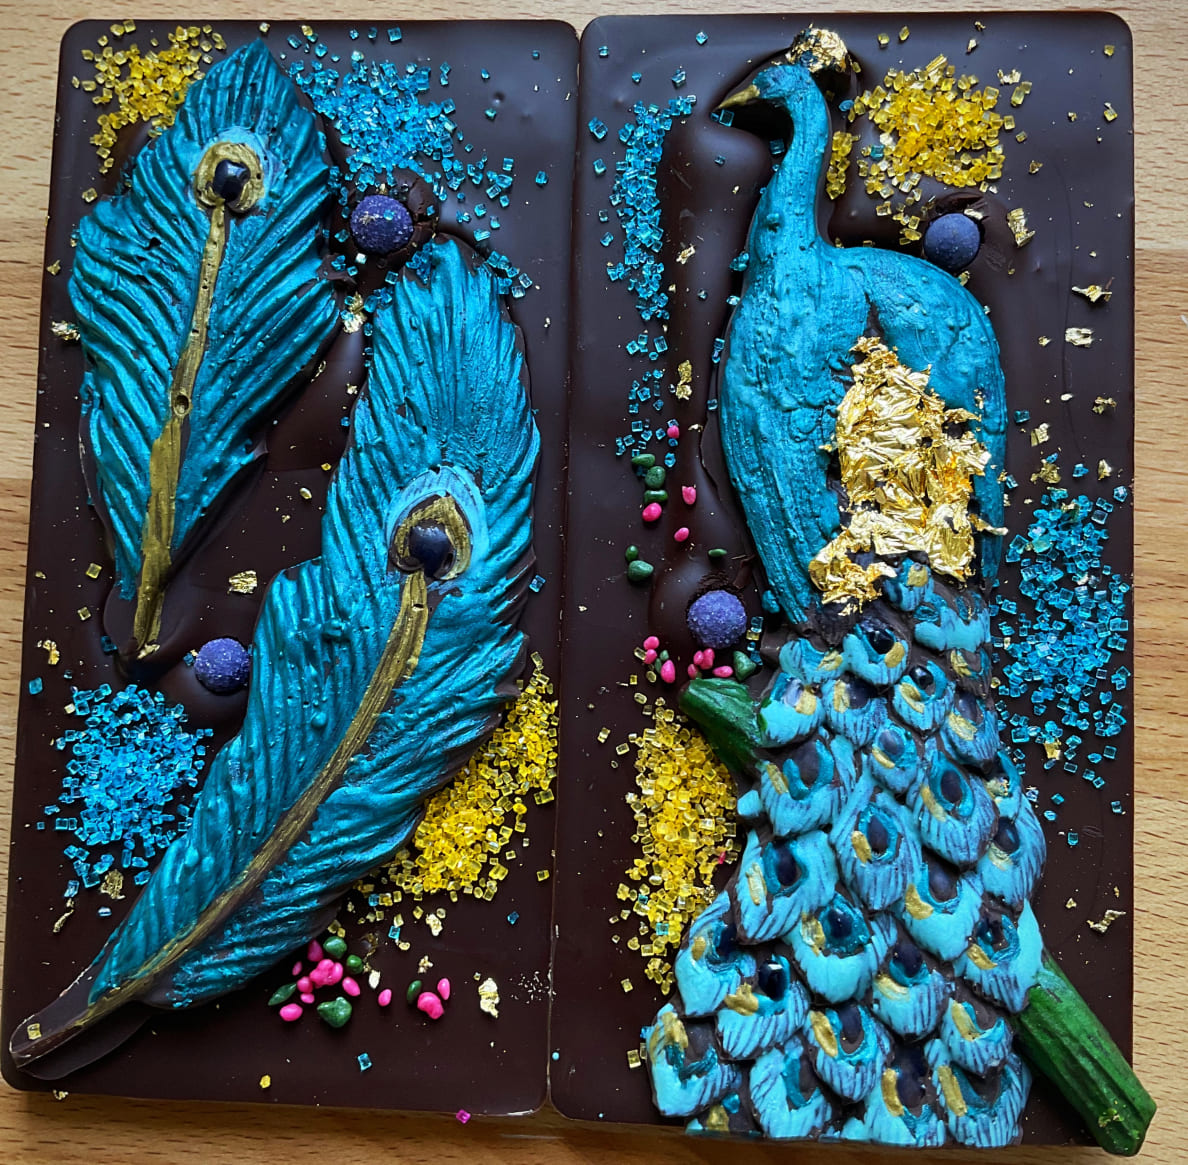 A set of 2 chocolate bars from Raven Rising Global-Indigenous Chocolates are decorated with an edible blue and gold peacock design and a matching peacock feathers design.